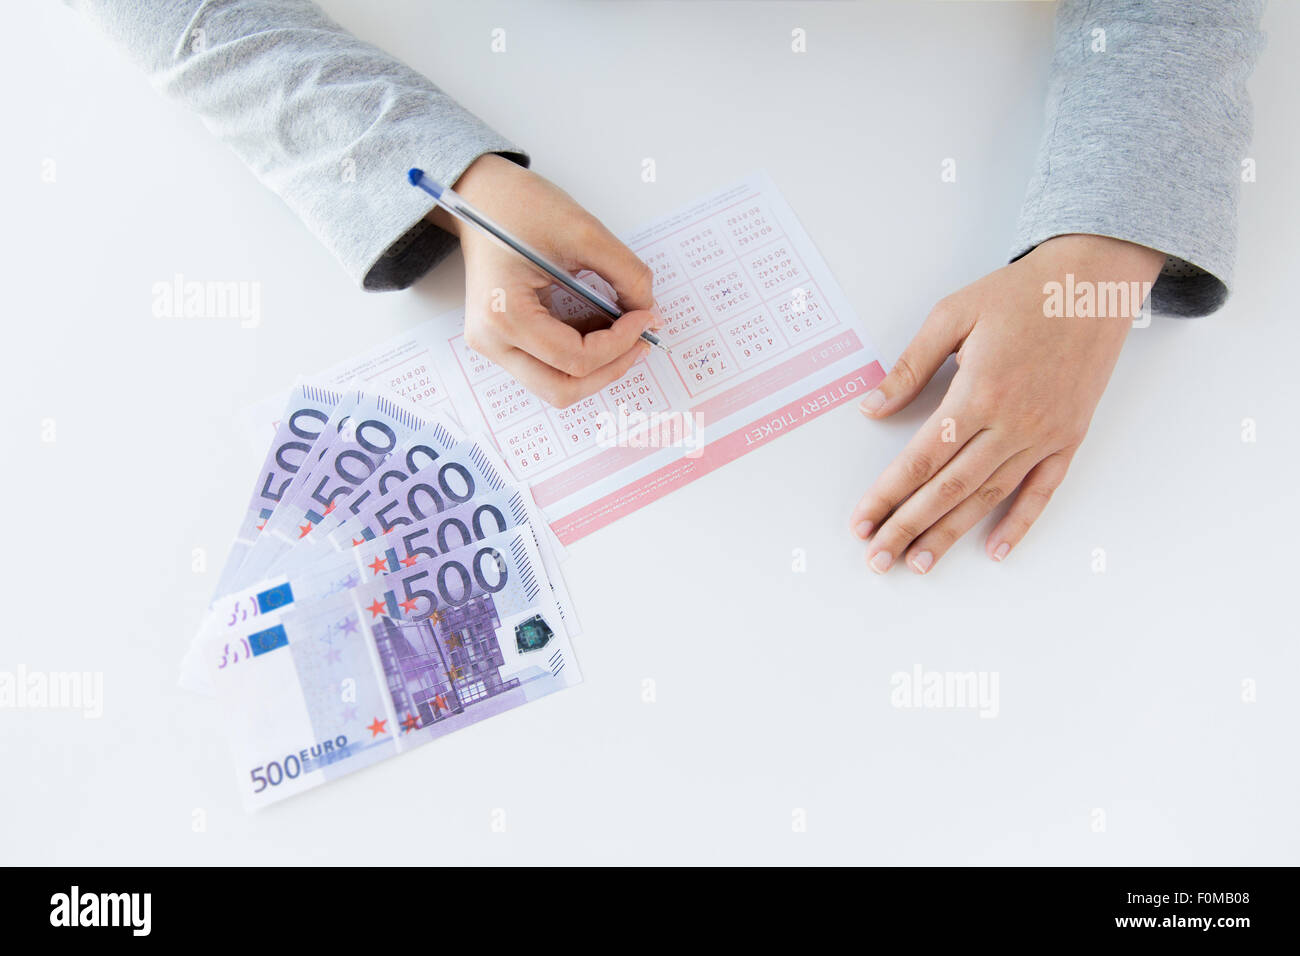 close up of hands with lottery ticket and money Stock Photo